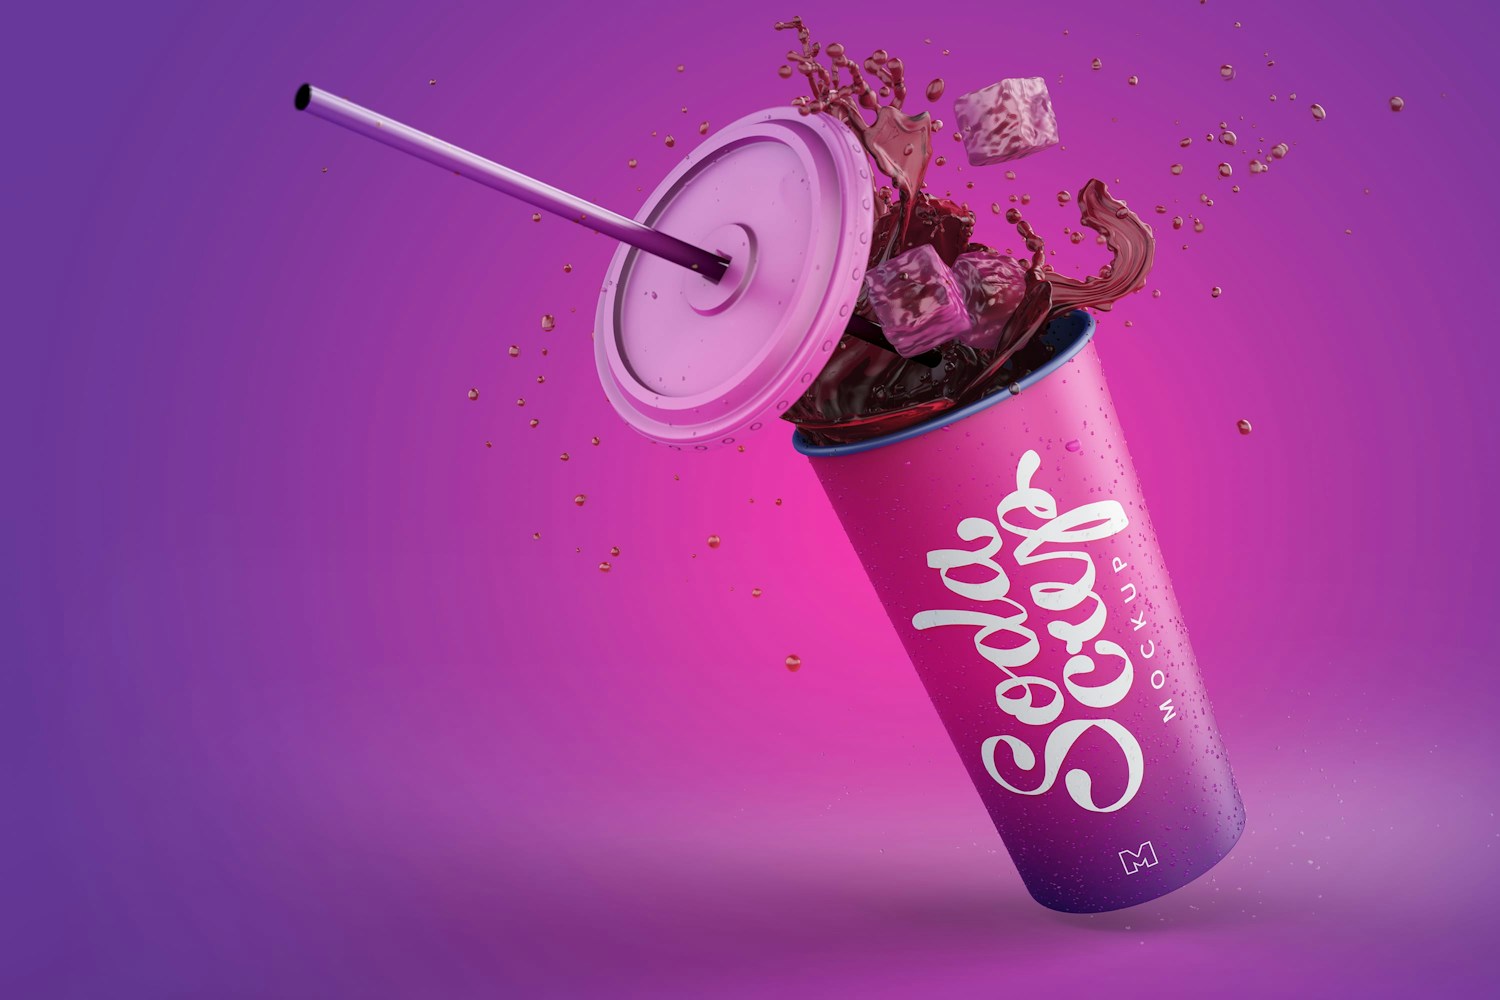 A unique Soda Cup Mockup to create stunning presentations of your promotions.